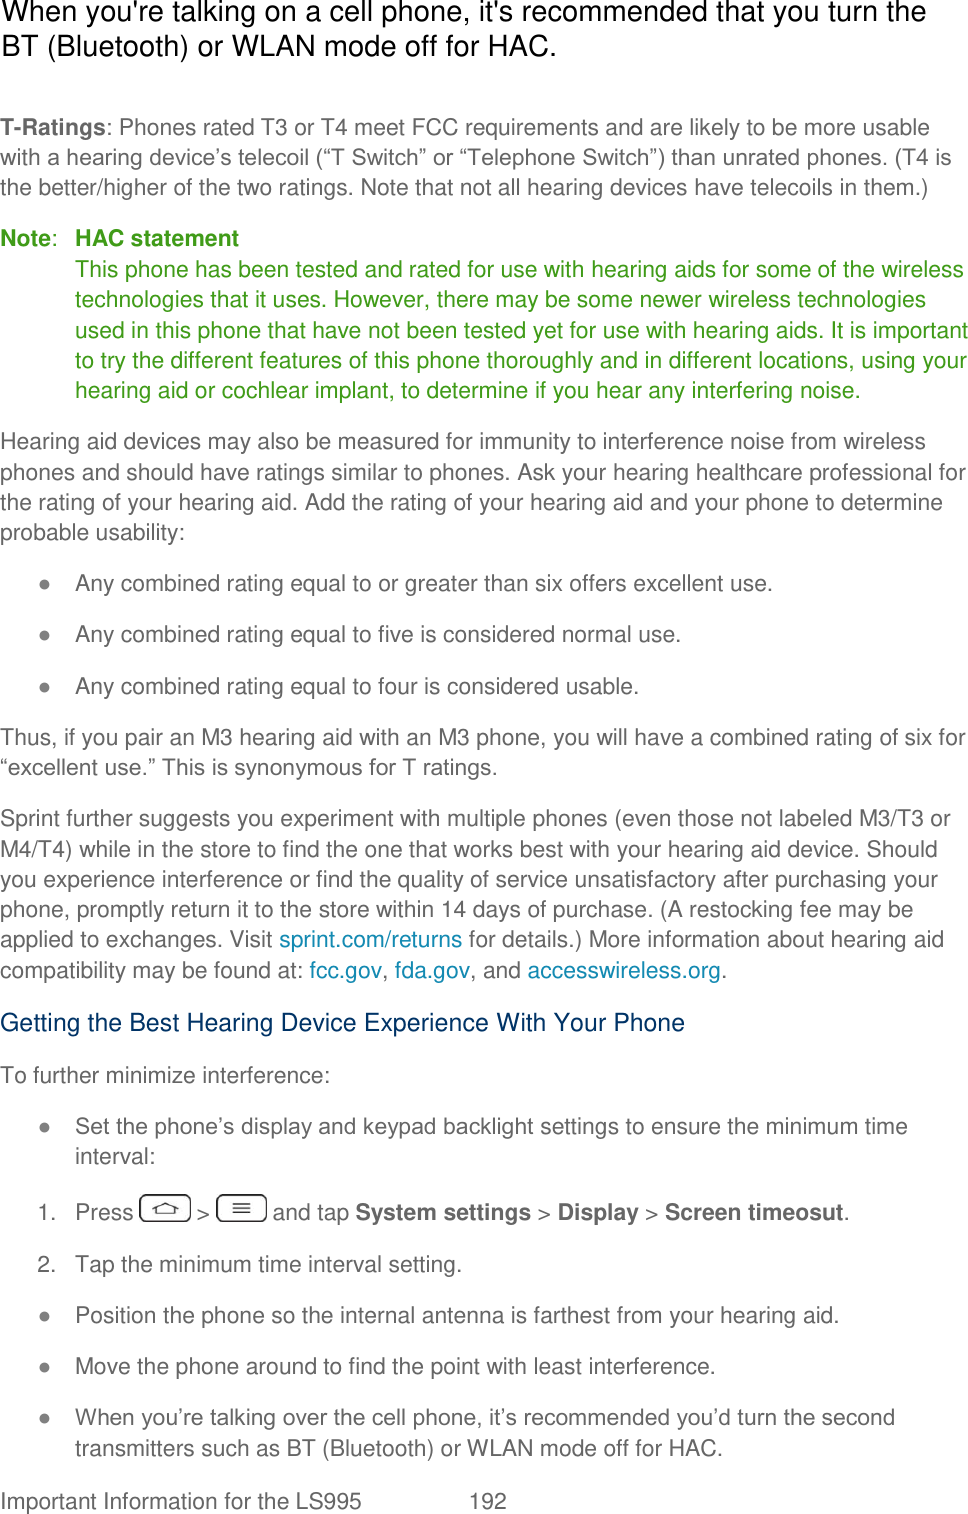  Important Information for the LS995  192   T-Ratings: Phones rated T3 or T4 meet FCC requirements and are likely to be more usable with a hearing device‘s telecoil (―T Switch‖ or ―Telephone Switch‖) than unrated phones. (T4 is the better/higher of the two ratings. Note that not all hearing devices have telecoils in them.) Note:  HAC statement  This phone has been tested and rated for use with hearing aids for some of the wireless technologies that it uses. However, there may be some newer wireless technologies used in this phone that have not been tested yet for use with hearing aids. It is important to try the different features of this phone thoroughly and in different locations, using your hearing aid or cochlear implant, to determine if you hear any interfering noise. Hearing aid devices may also be measured for immunity to interference noise from wireless phones and should have ratings similar to phones. Ask your hearing healthcare professional for the rating of your hearing aid. Add the rating of your hearing aid and your phone to determine probable usability: ● Any combined rating equal to or greater than six offers excellent use. ● Any combined rating equal to five is considered normal use. ● Any combined rating equal to four is considered usable. Thus, if you pair an M3 hearing aid with an M3 phone, you will have a combined rating of six for ―excellent use.‖ This is synonymous for T ratings. Sprint further suggests you experiment with multiple phones (even those not labeled M3/T3 or M4/T4) while in the store to find the one that works best with your hearing aid device. Should you experience interference or find the quality of service unsatisfactory after purchasing your phone, promptly return it to the store within 14 days of purchase. (A restocking fee may be applied to exchanges. Visit sprint.com/returns for details.) More information about hearing aid compatibility may be found at: fcc.gov, fda.gov, and accesswireless.org. Getting the Best Hearing Device Experience With Your Phone To further minimize interference: ● Set the phone‘s display and keypad backlight settings to ensure the minimum time interval: 1.  Press   &gt;   and tap System settings &gt; Display &gt; Screen timeosut. 2.  Tap the minimum time interval setting. ● Position the phone so the internal antenna is farthest from your hearing aid. ● Move the phone around to find the point with least interference. ● When you‘re talking over the cell phone, it‘s recommended you‘d turn the second transmitters such as BT (Bluetooth) or WLAN mode off for HAC. When you&apos;re talking on a cell phone, it&apos;s recommended that you turn the BT (Bluetooth) or WLAN mode off for HAC.